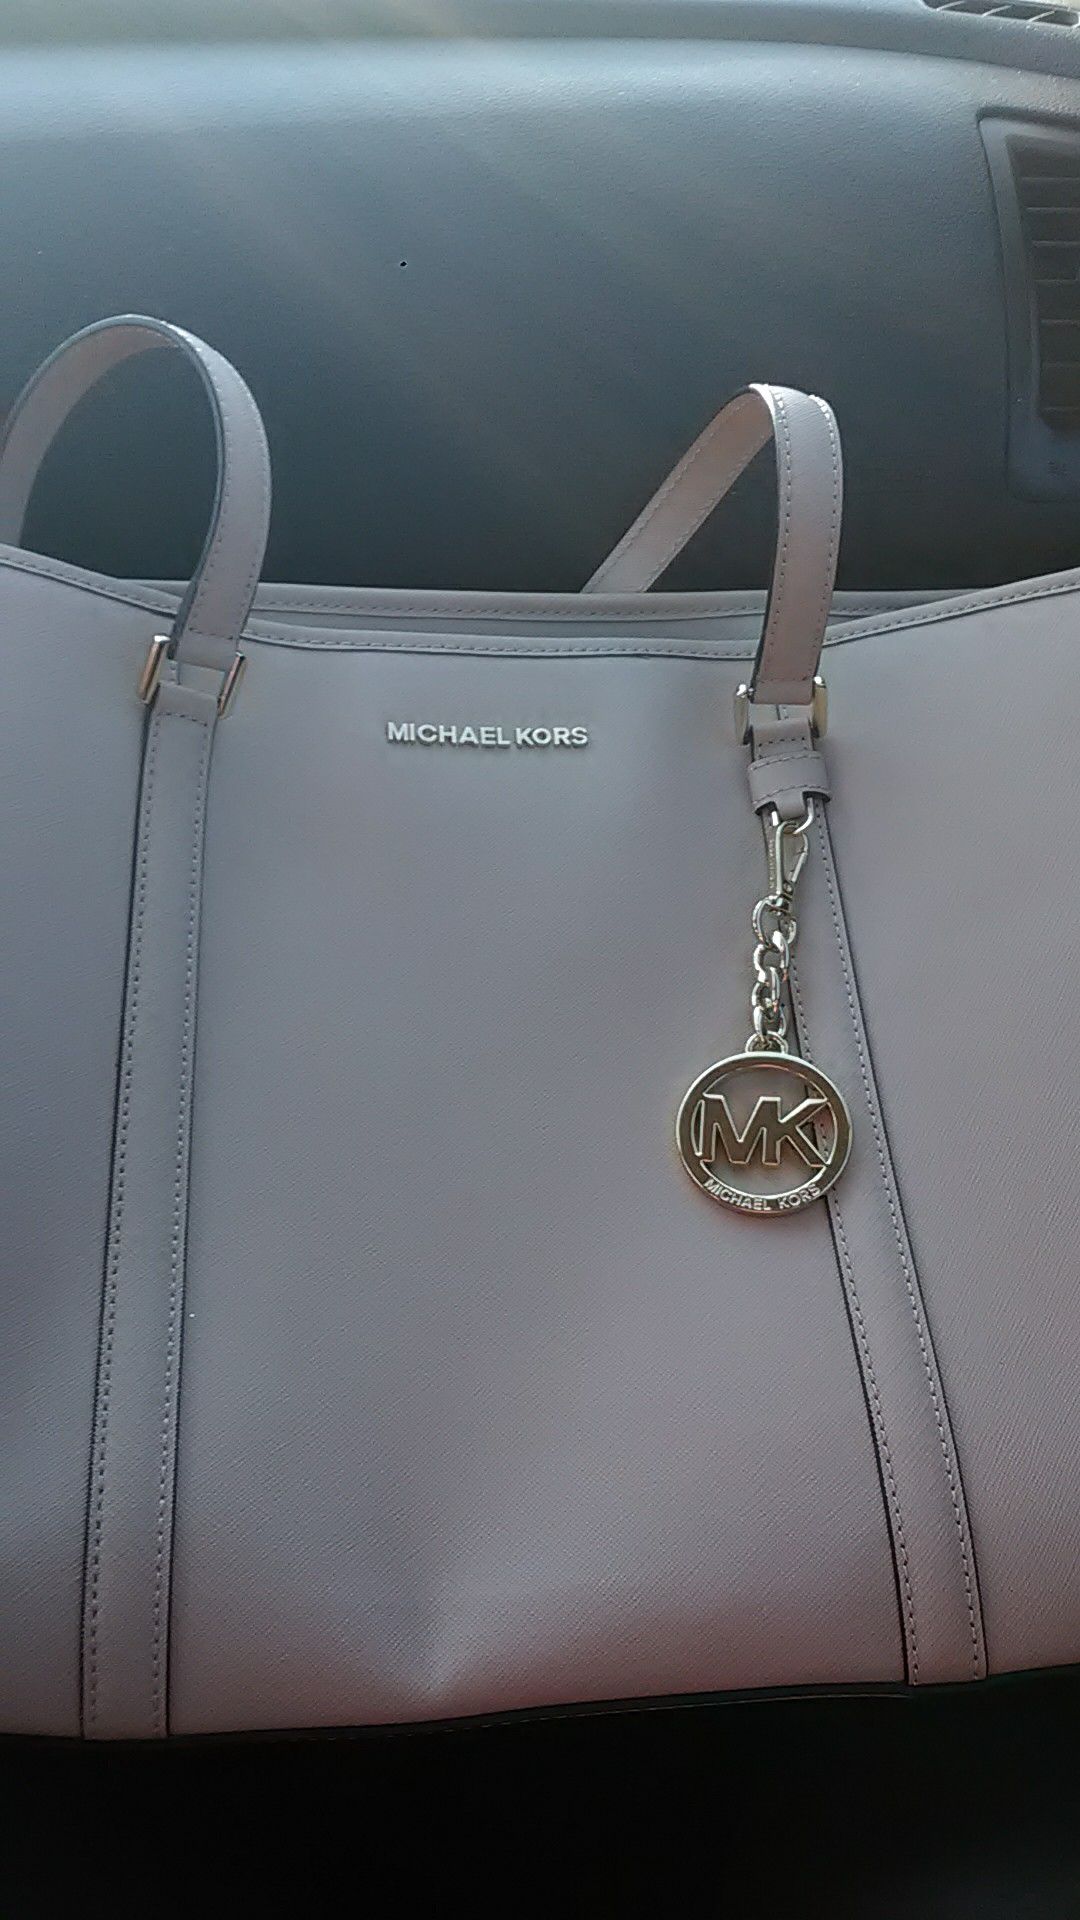 Micheal kors large tote 80$